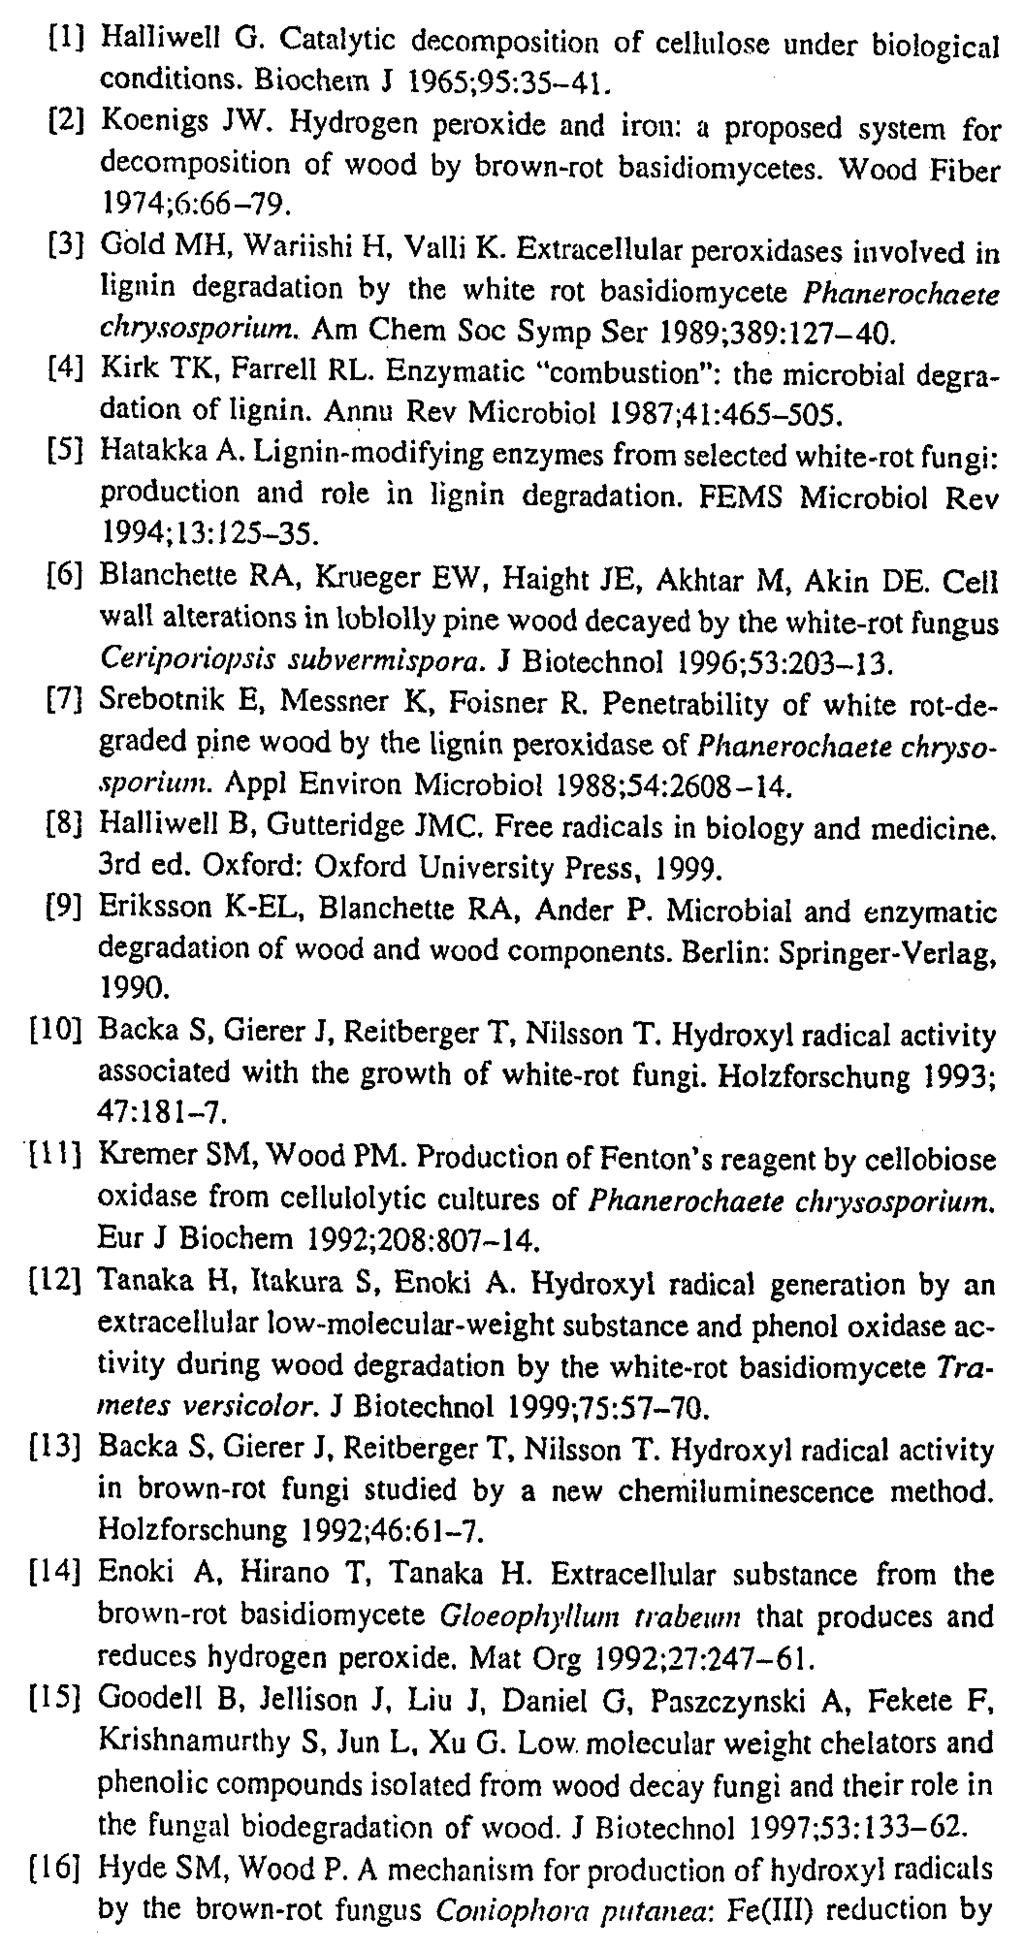 K.E. Hammel et al. / Enzyme and Microbial Technology 30 (2002) 445-453 451 nones need to be able to reduce Fe 3+ -oxalate complexes if Fenton chemistry via quinone redox cycling is to occur.